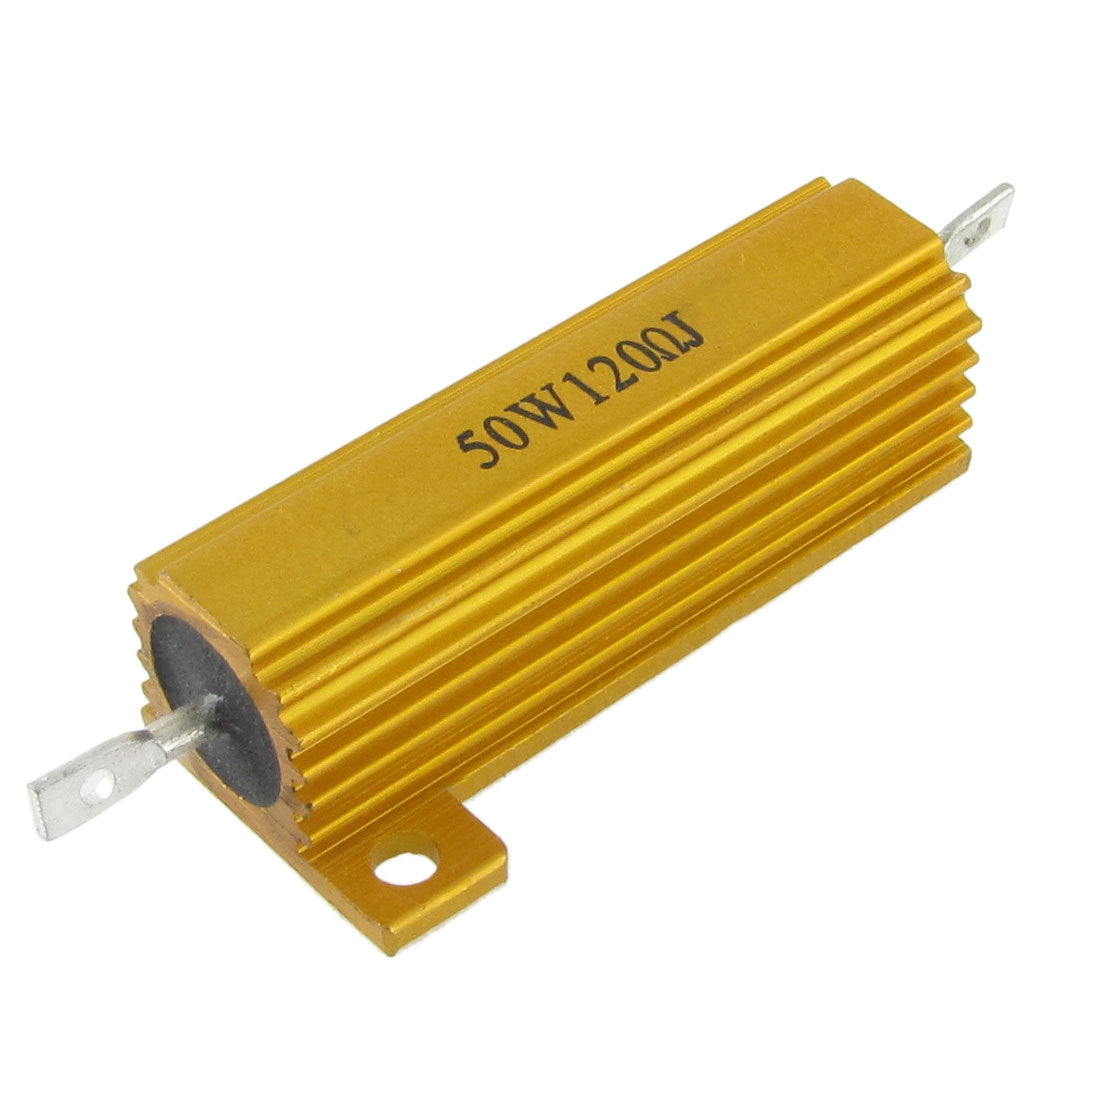 uxcell Uxcell Gold Tone 50W 120 Ohm Aluminum Housed Wirewound Power Resistor